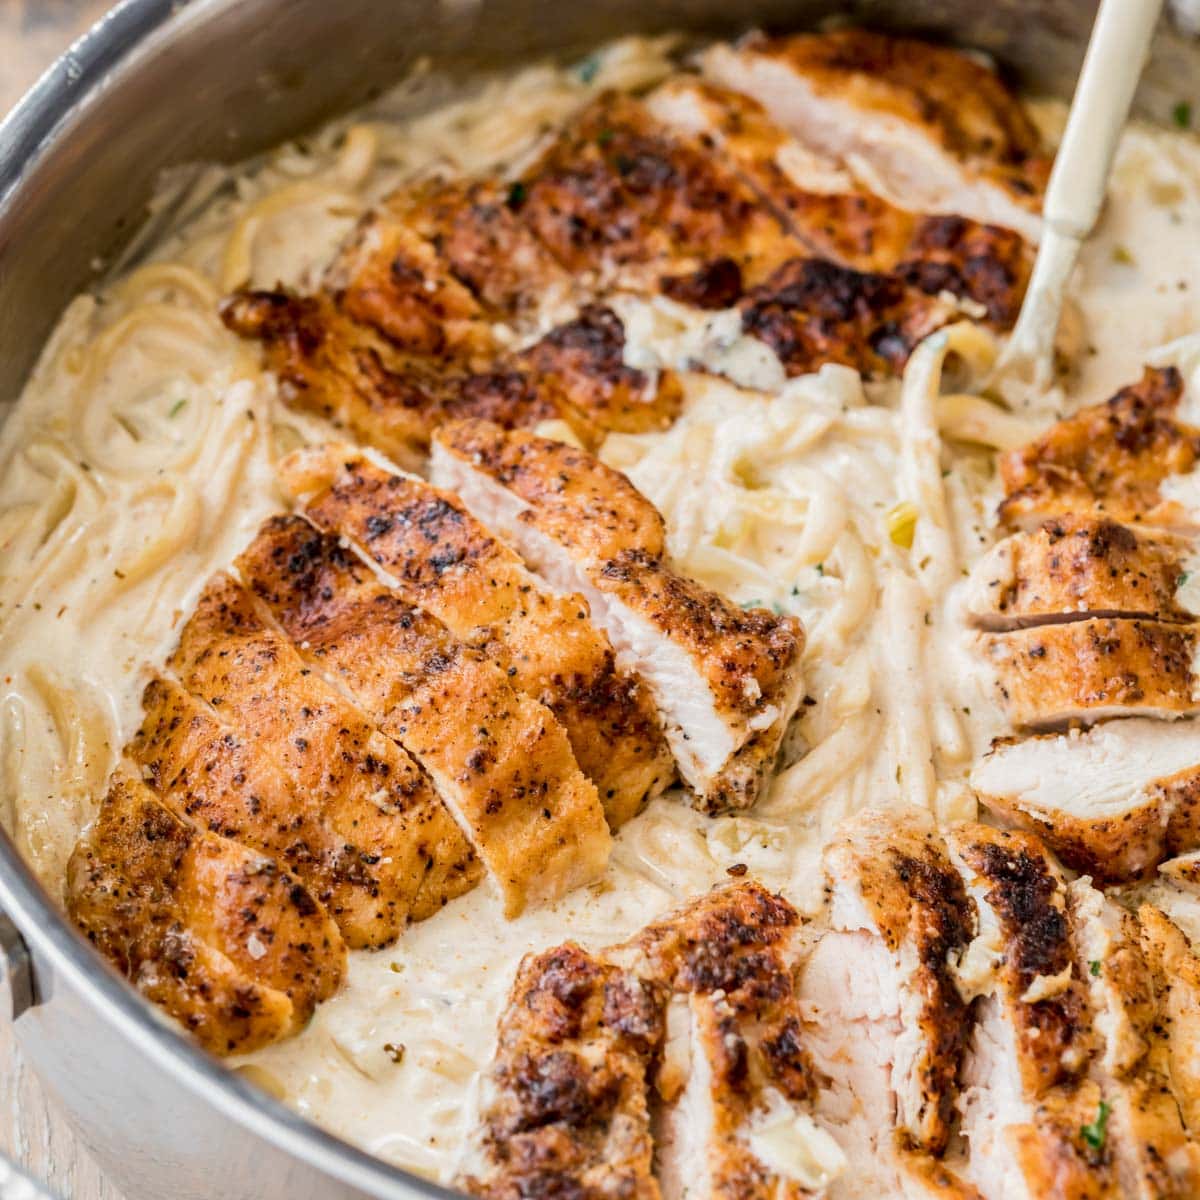 Dressed Chicken Breasts with Angel Hair Pasta Recipe